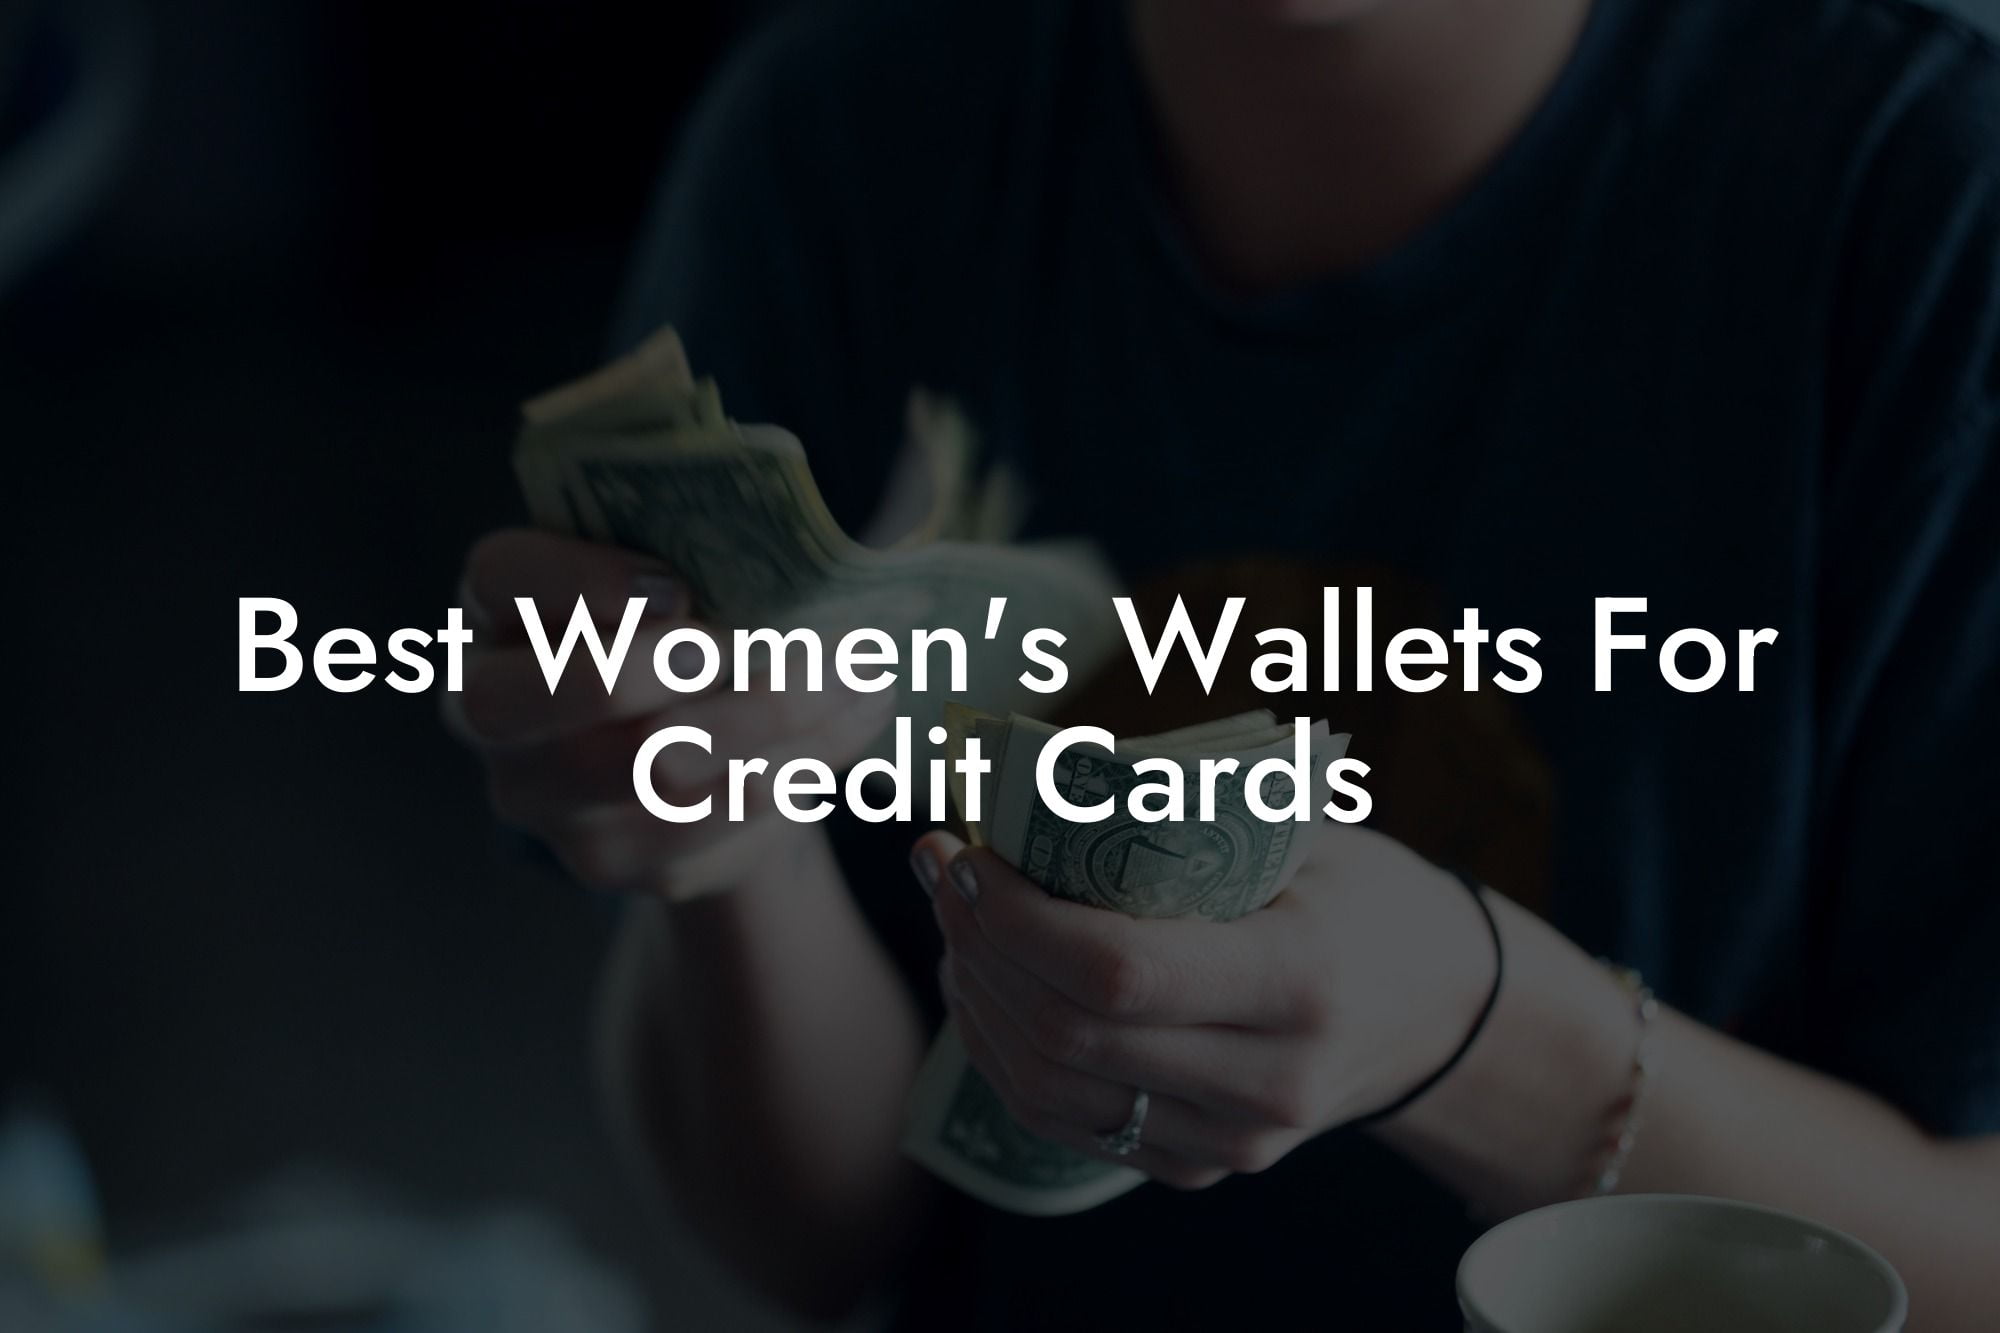 Best Women's Wallets For Credit Cards